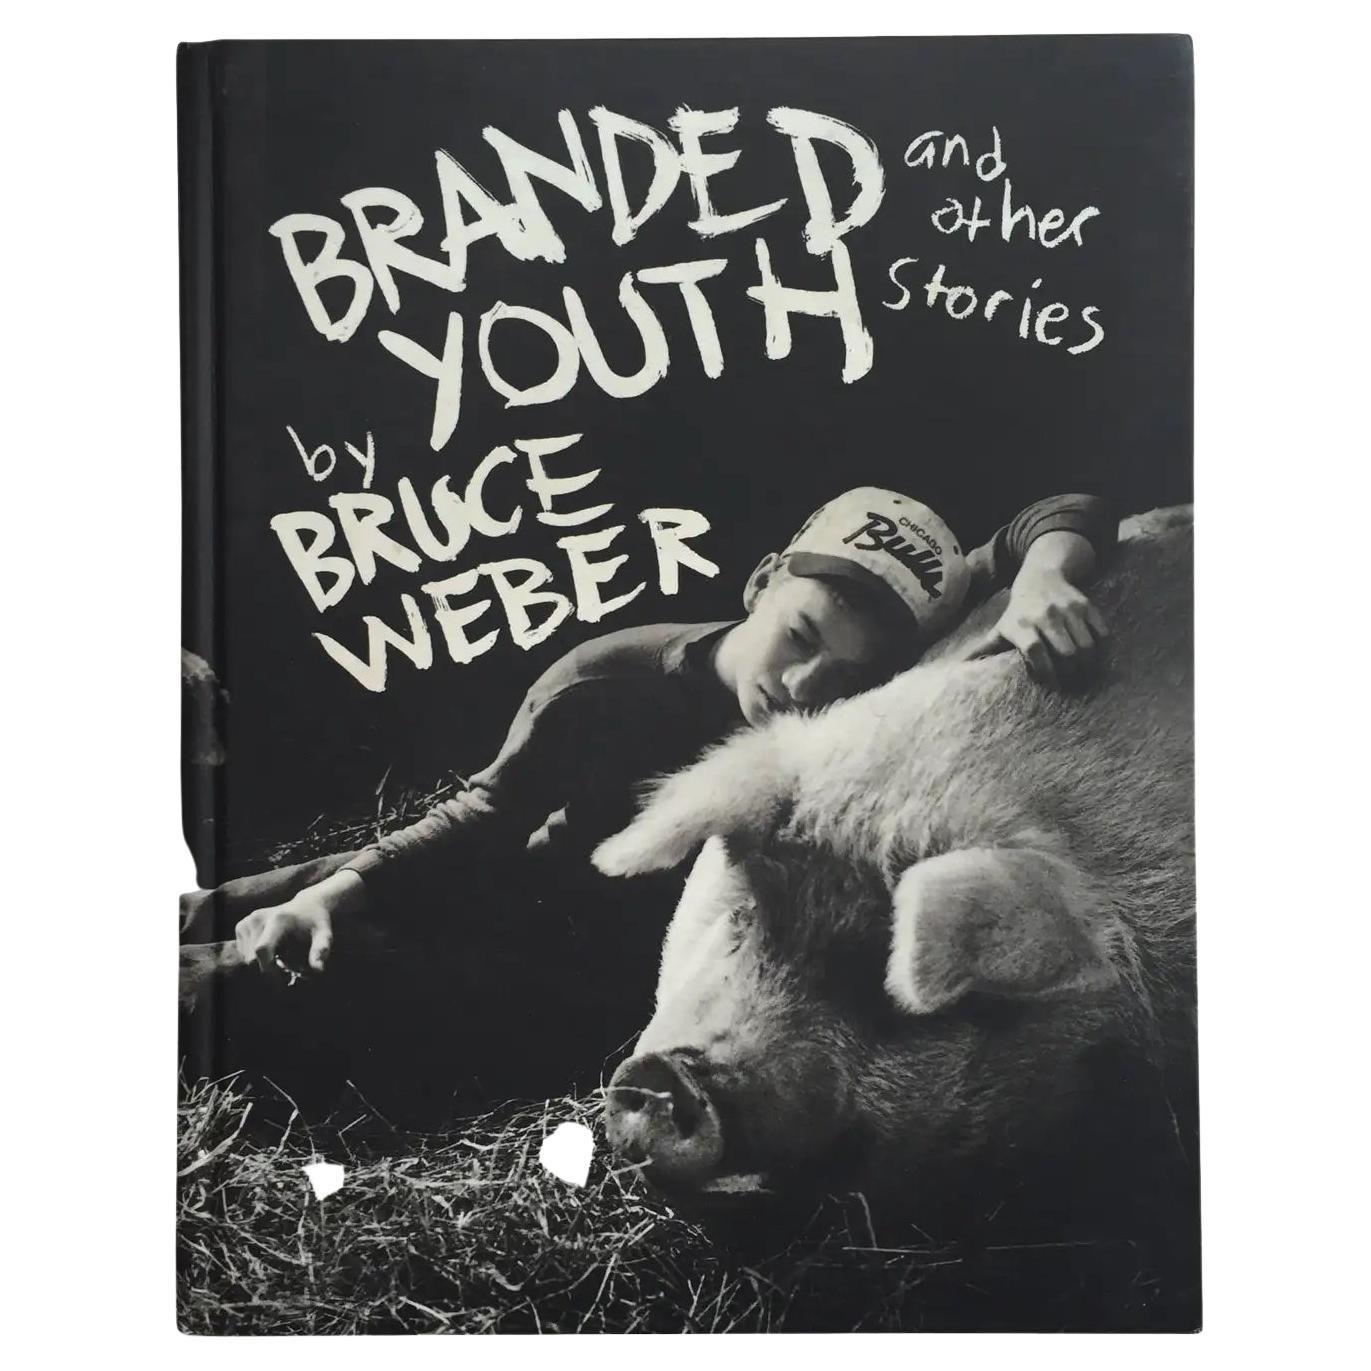 Branded Youth and Other Stories, Bruce Weber, 1st Edition, Bullfinch, 1997